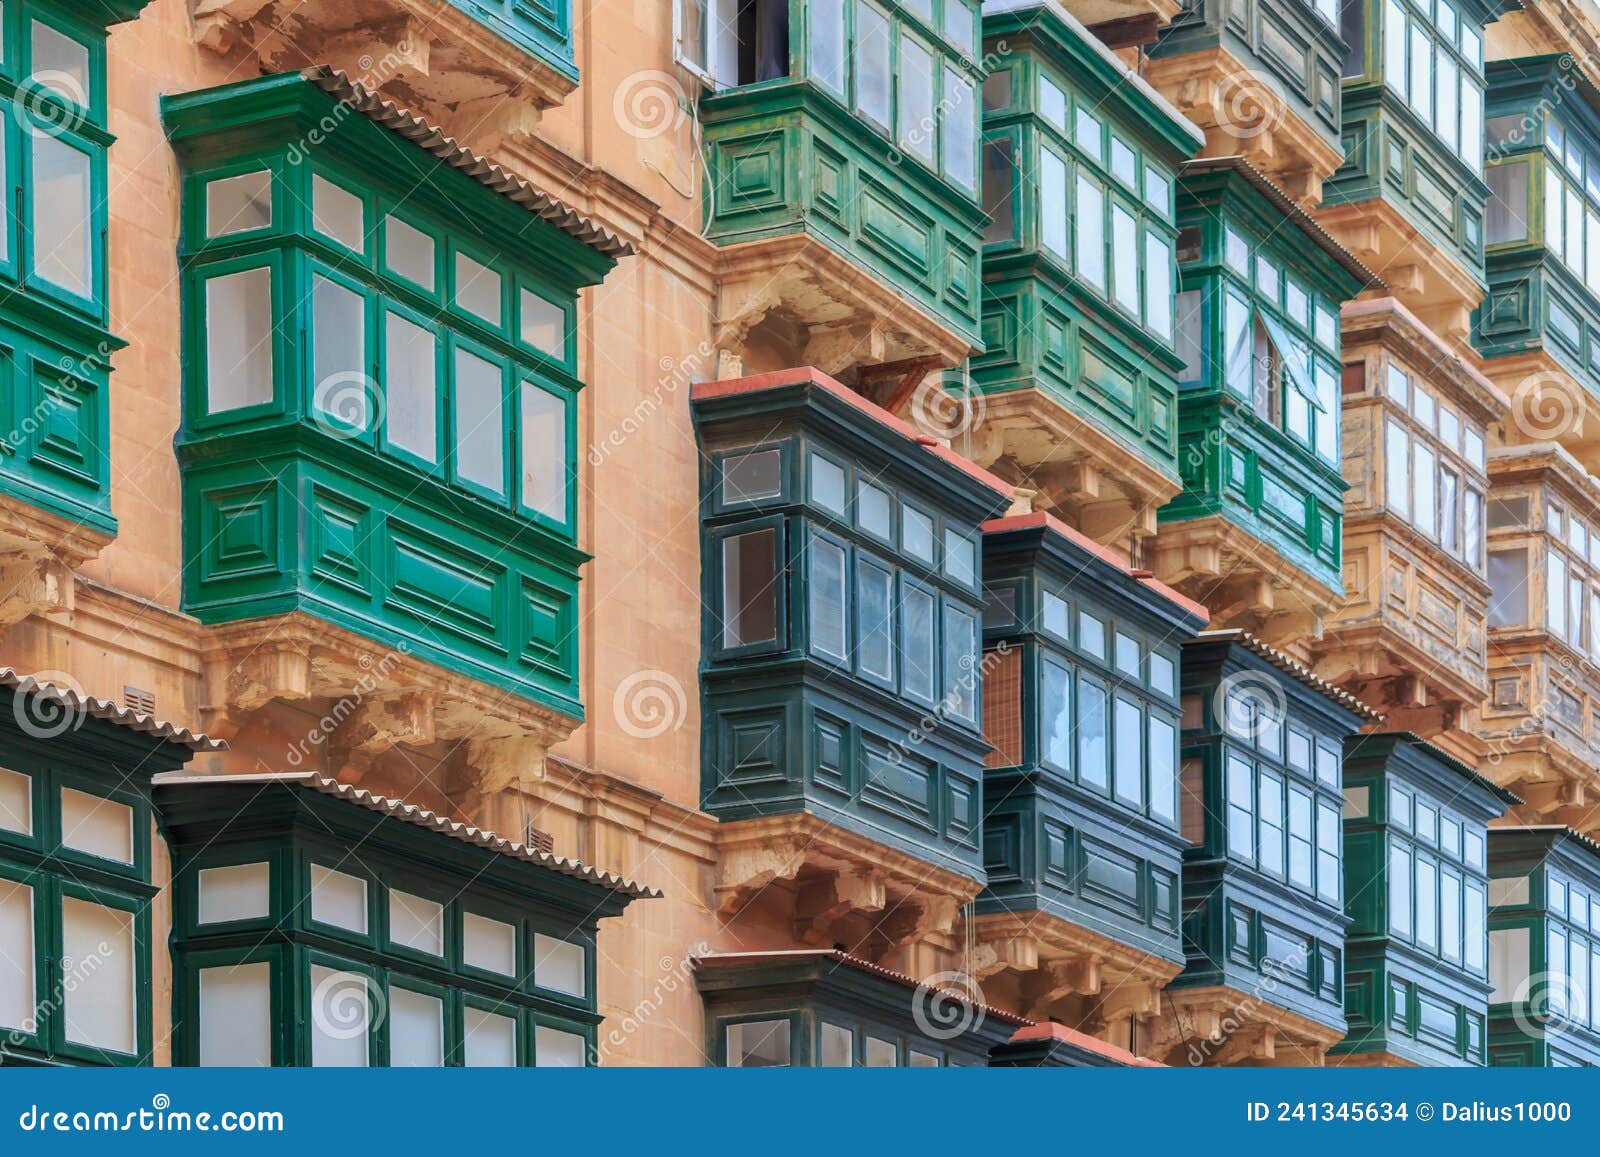 historical old colorful balconies in valletta, malta